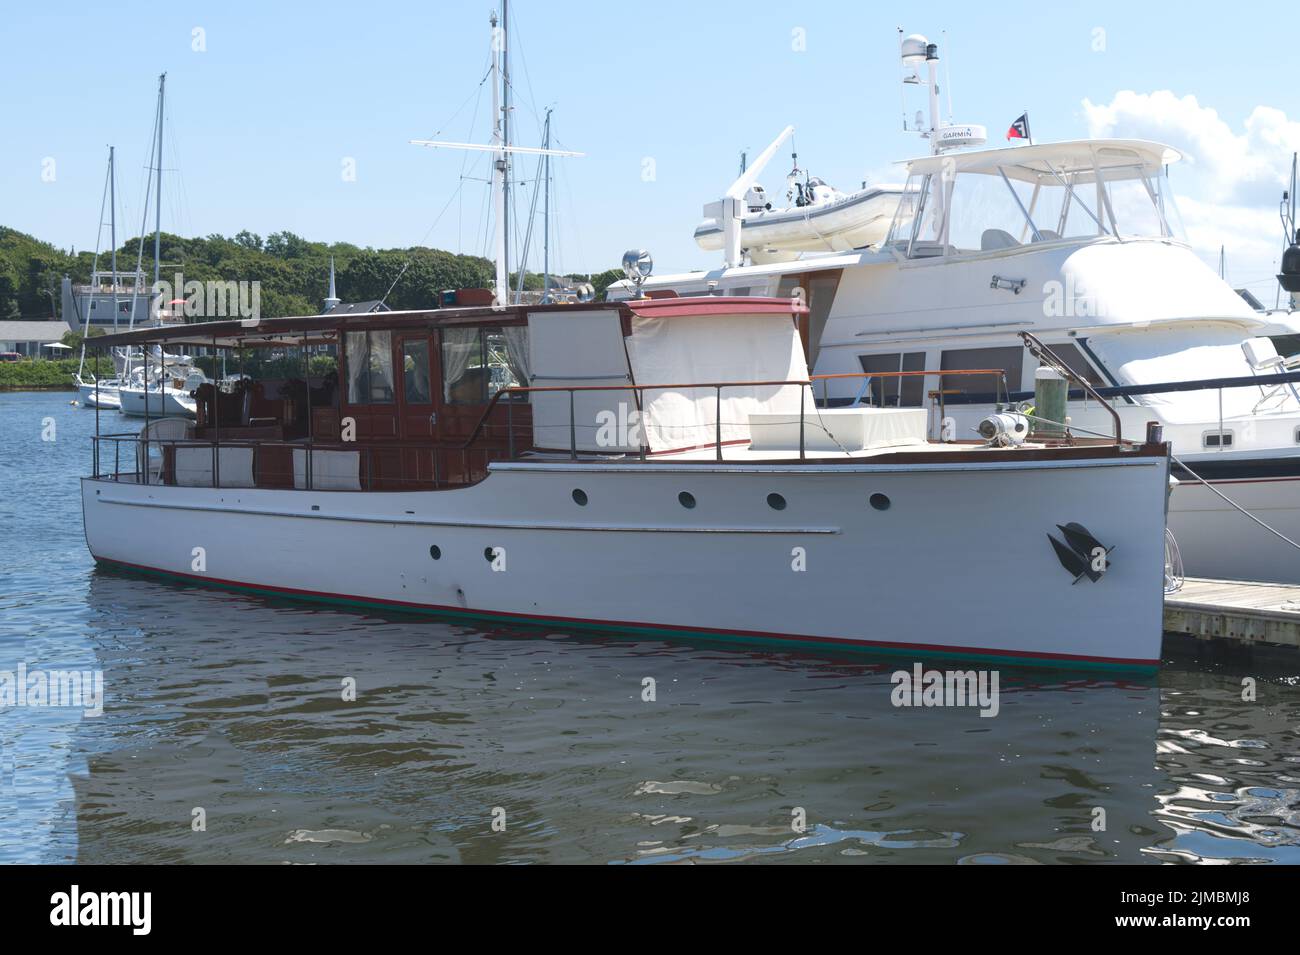 Historic motor vessel 'Cheerio' built in 1929, docked in Falmouth Harbor, Massachusetts on Cape Cod. Stock Photo